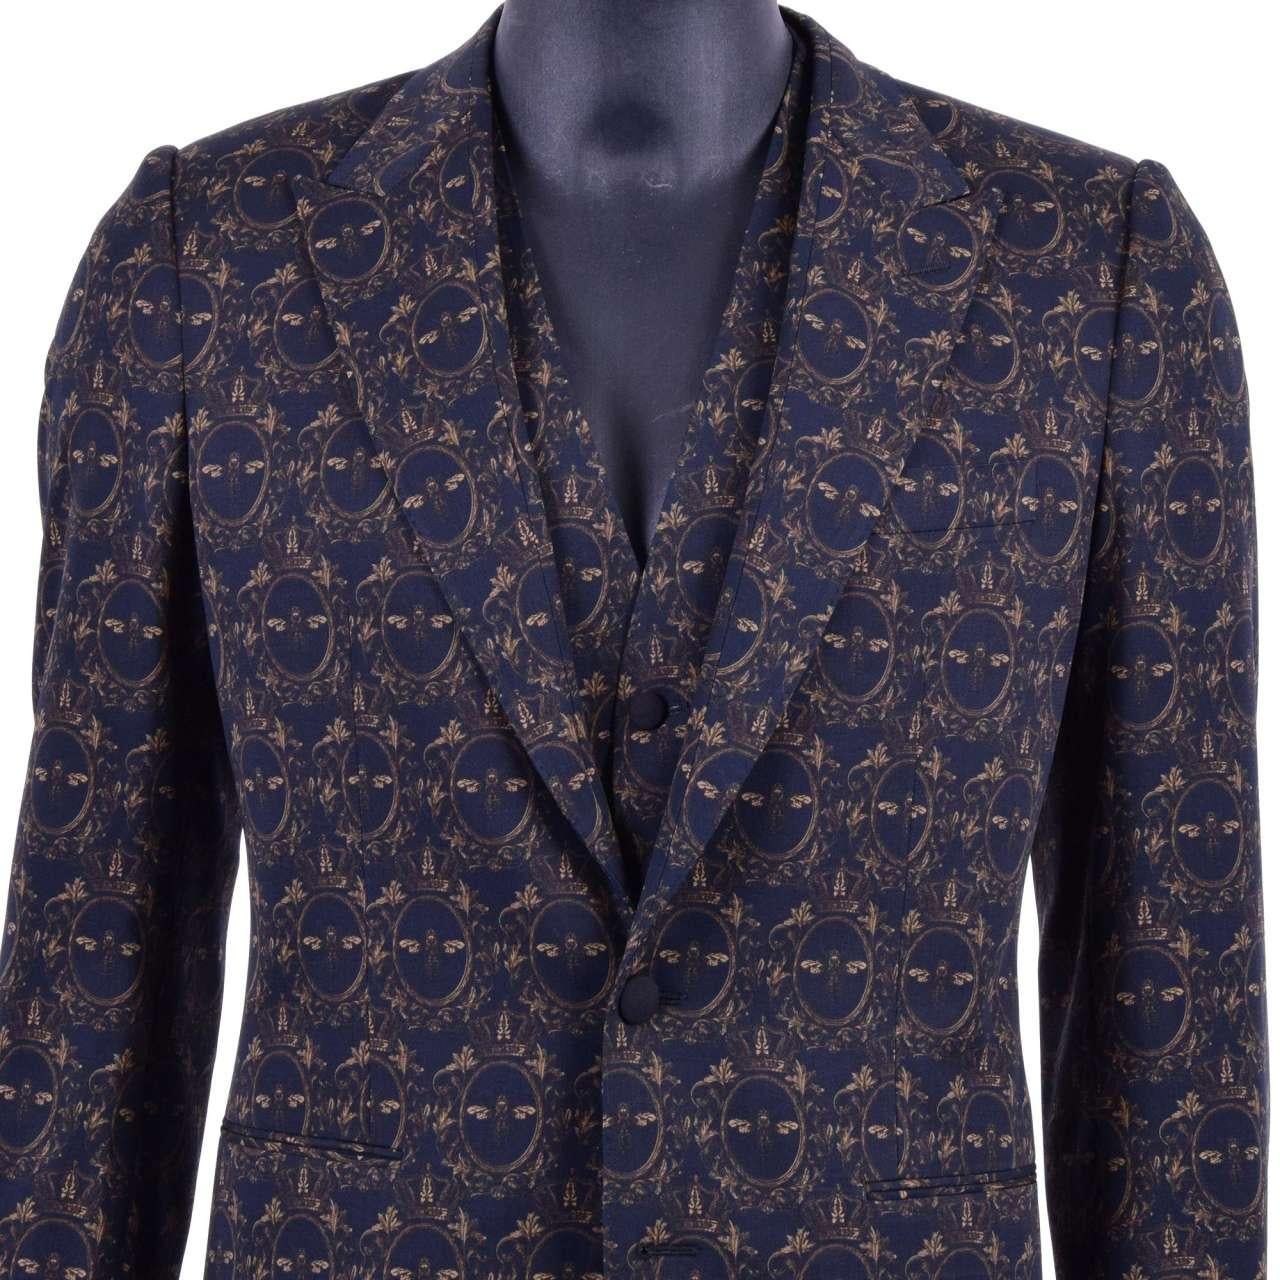 Dolce & Gabbana - 3-Pieces Bee Crown Suit Blue Gold 44 For Sale 1